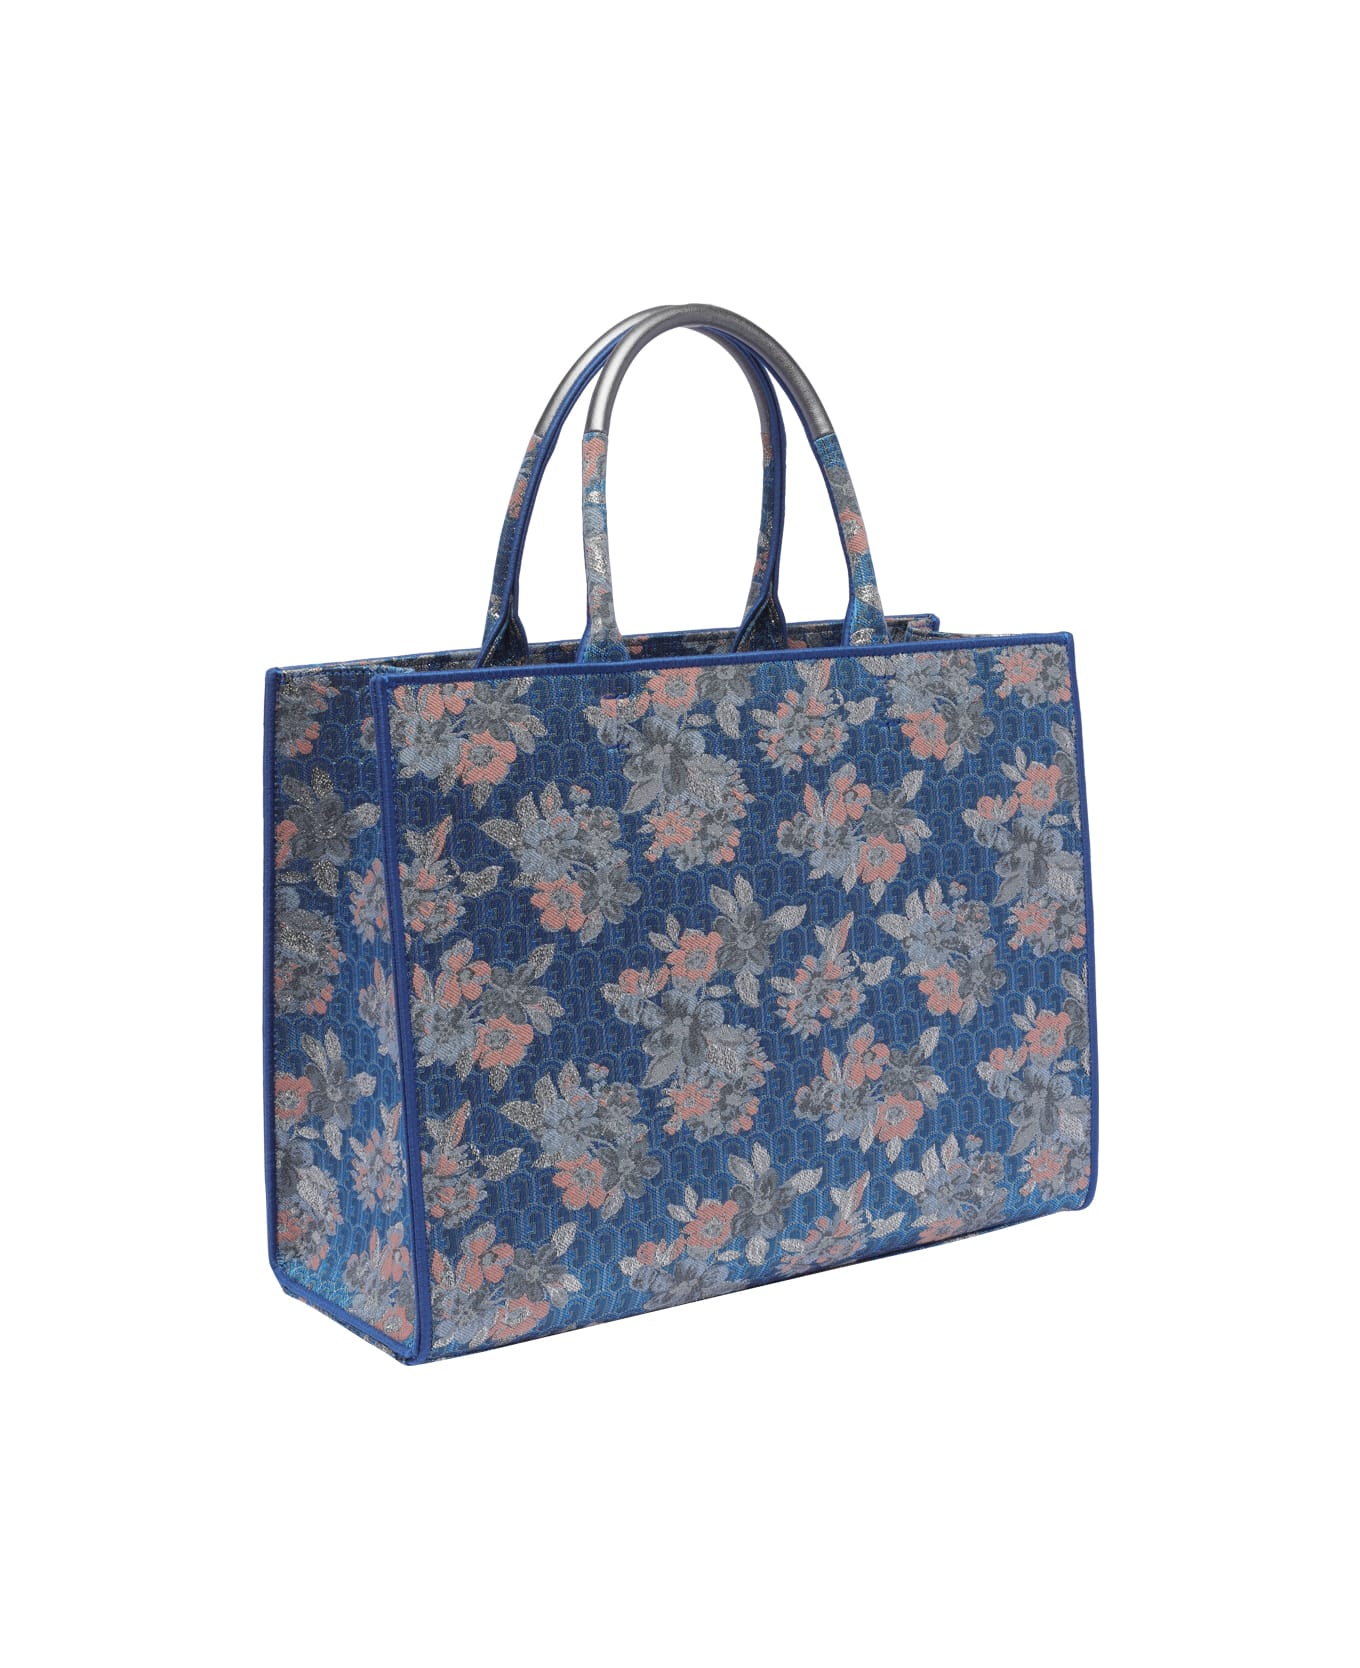 Furla Opportunity Shopping Bag - Gnawed Blue トートバッグ